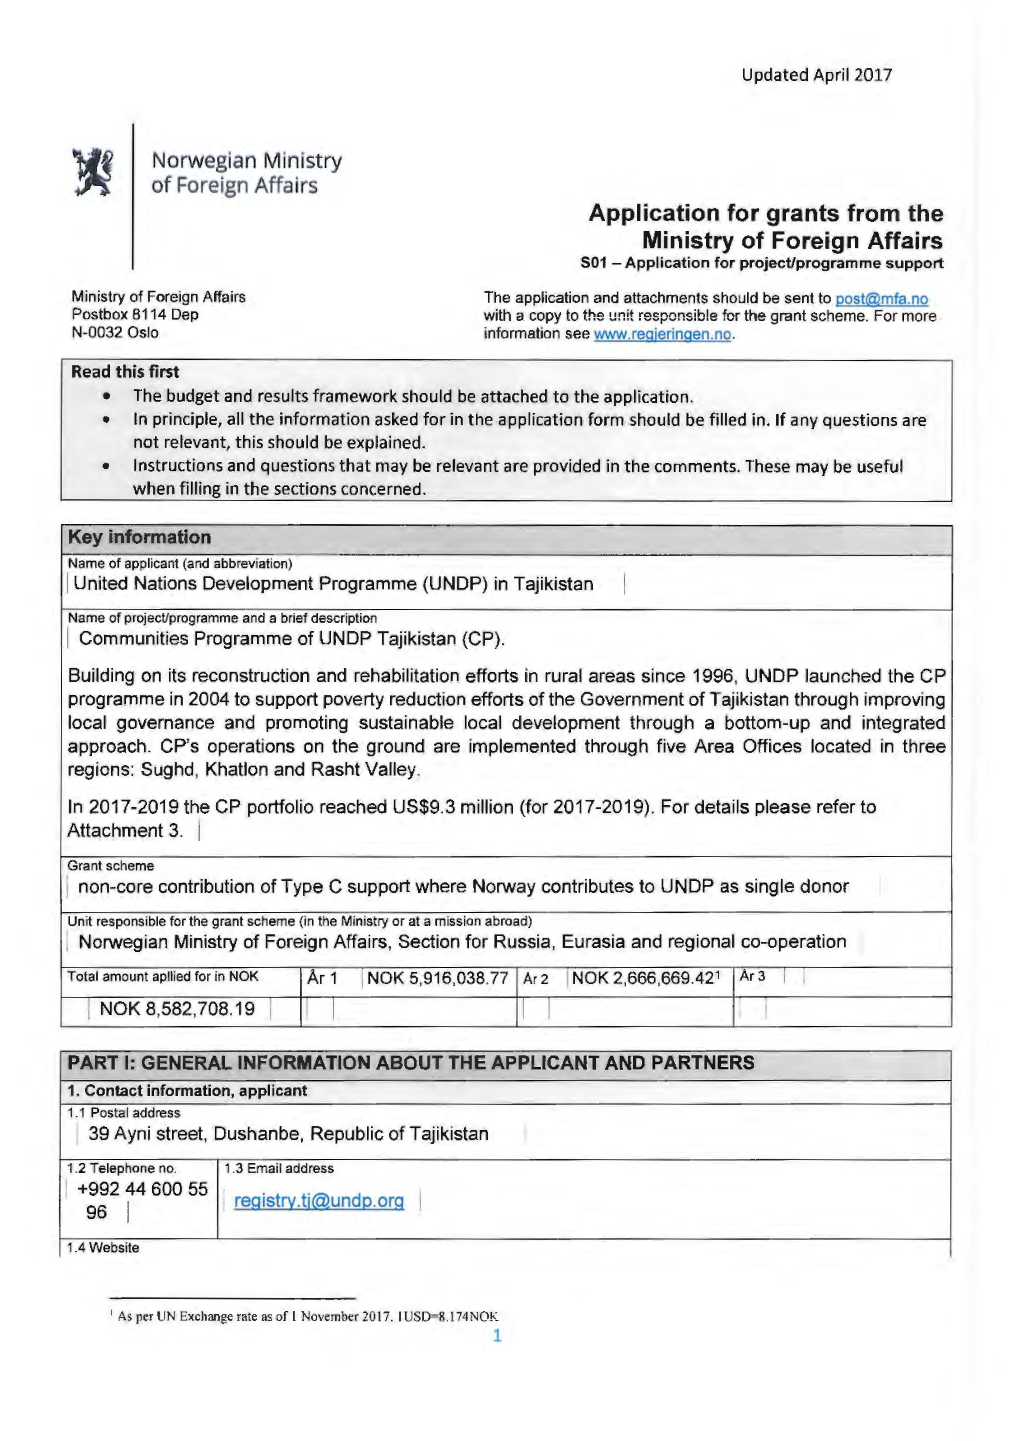 Application for Grants from the Ministry of Foreign Affairs 501 -Application for Project/Programme Support